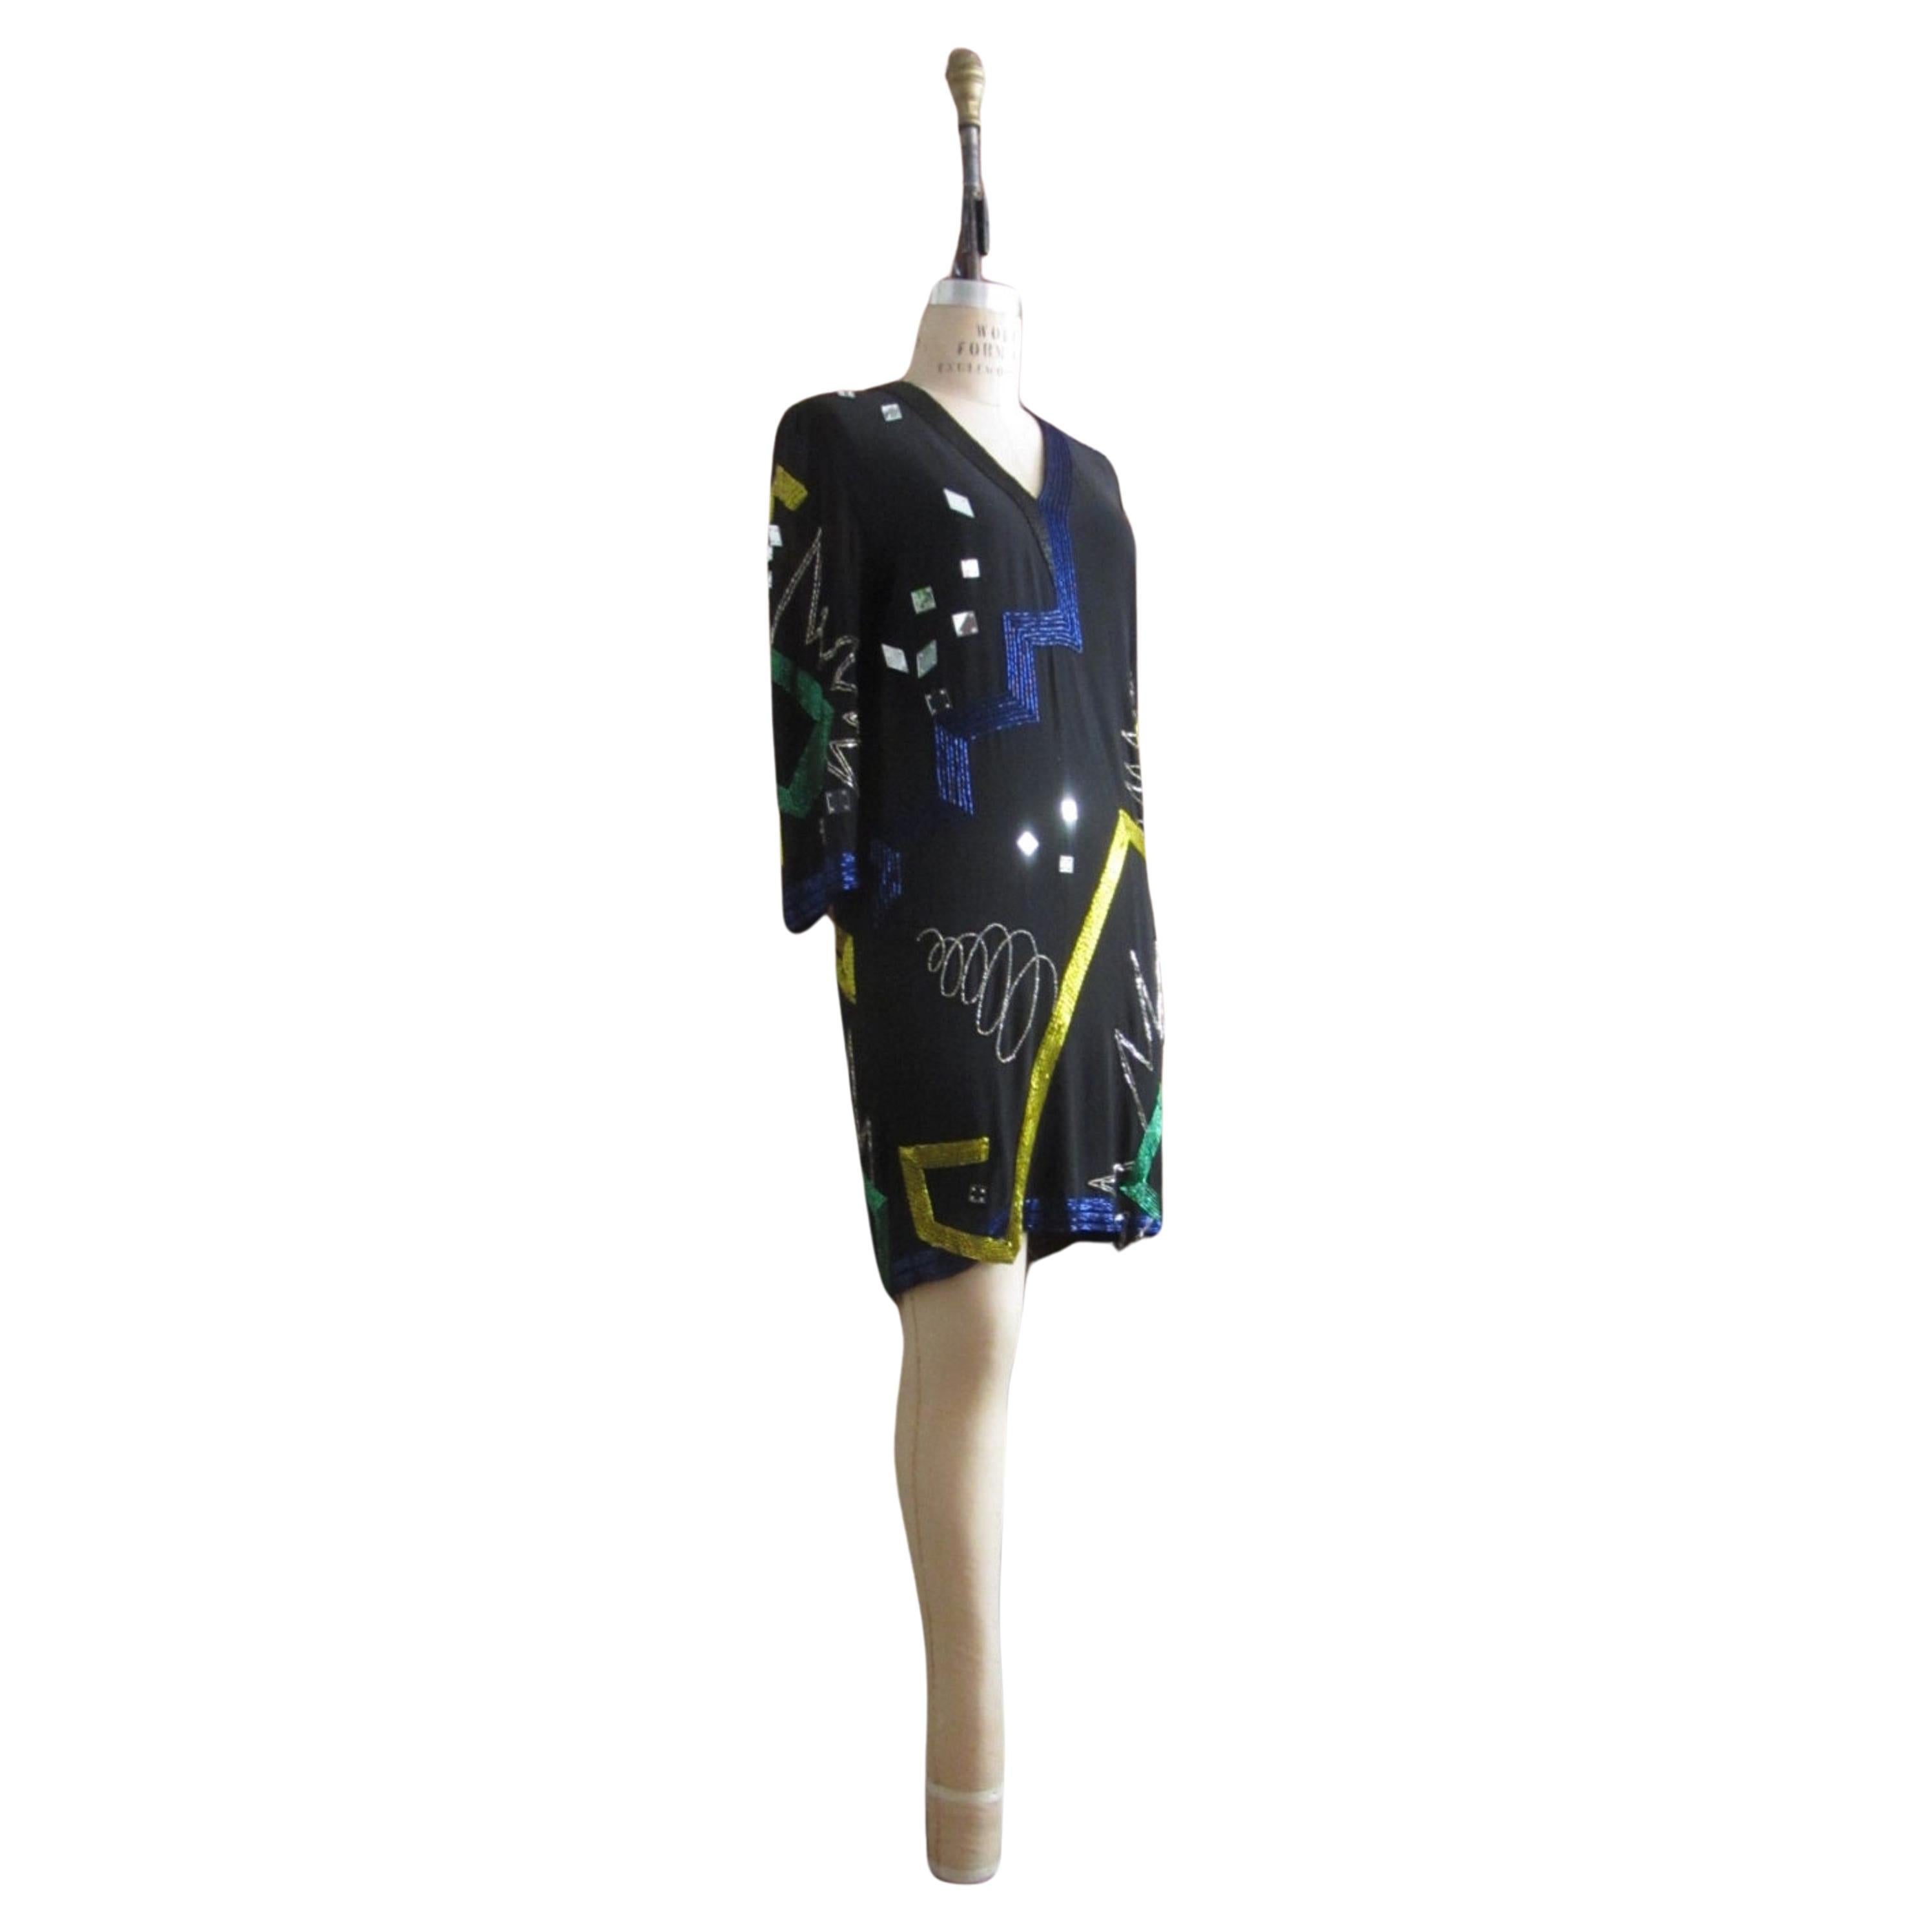 Amazing black silk chiffon pop art beaded dress by Fabrice Simon.
hand sewn multi colored abstract shapes
green, blue, silver, gold seed and bugle beads
squares and prism shaped lucite mirrors
v neck collar
sheer 3/4 length sleeves
loose fitting